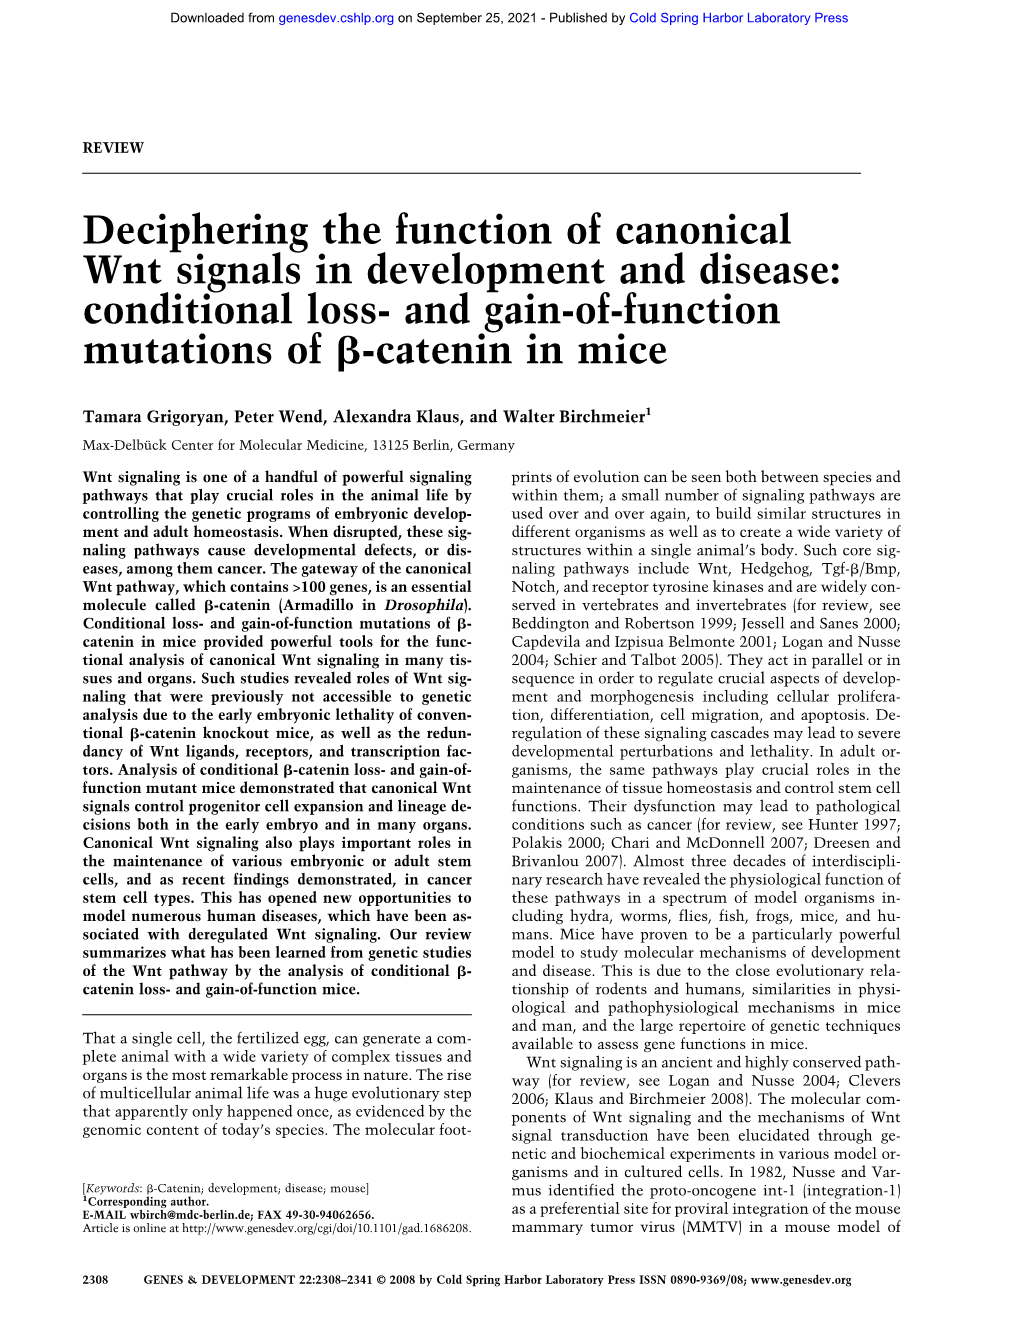 Conditional Loss- and Gain-Of-Function Mutations of ␤-Catenin in Mice